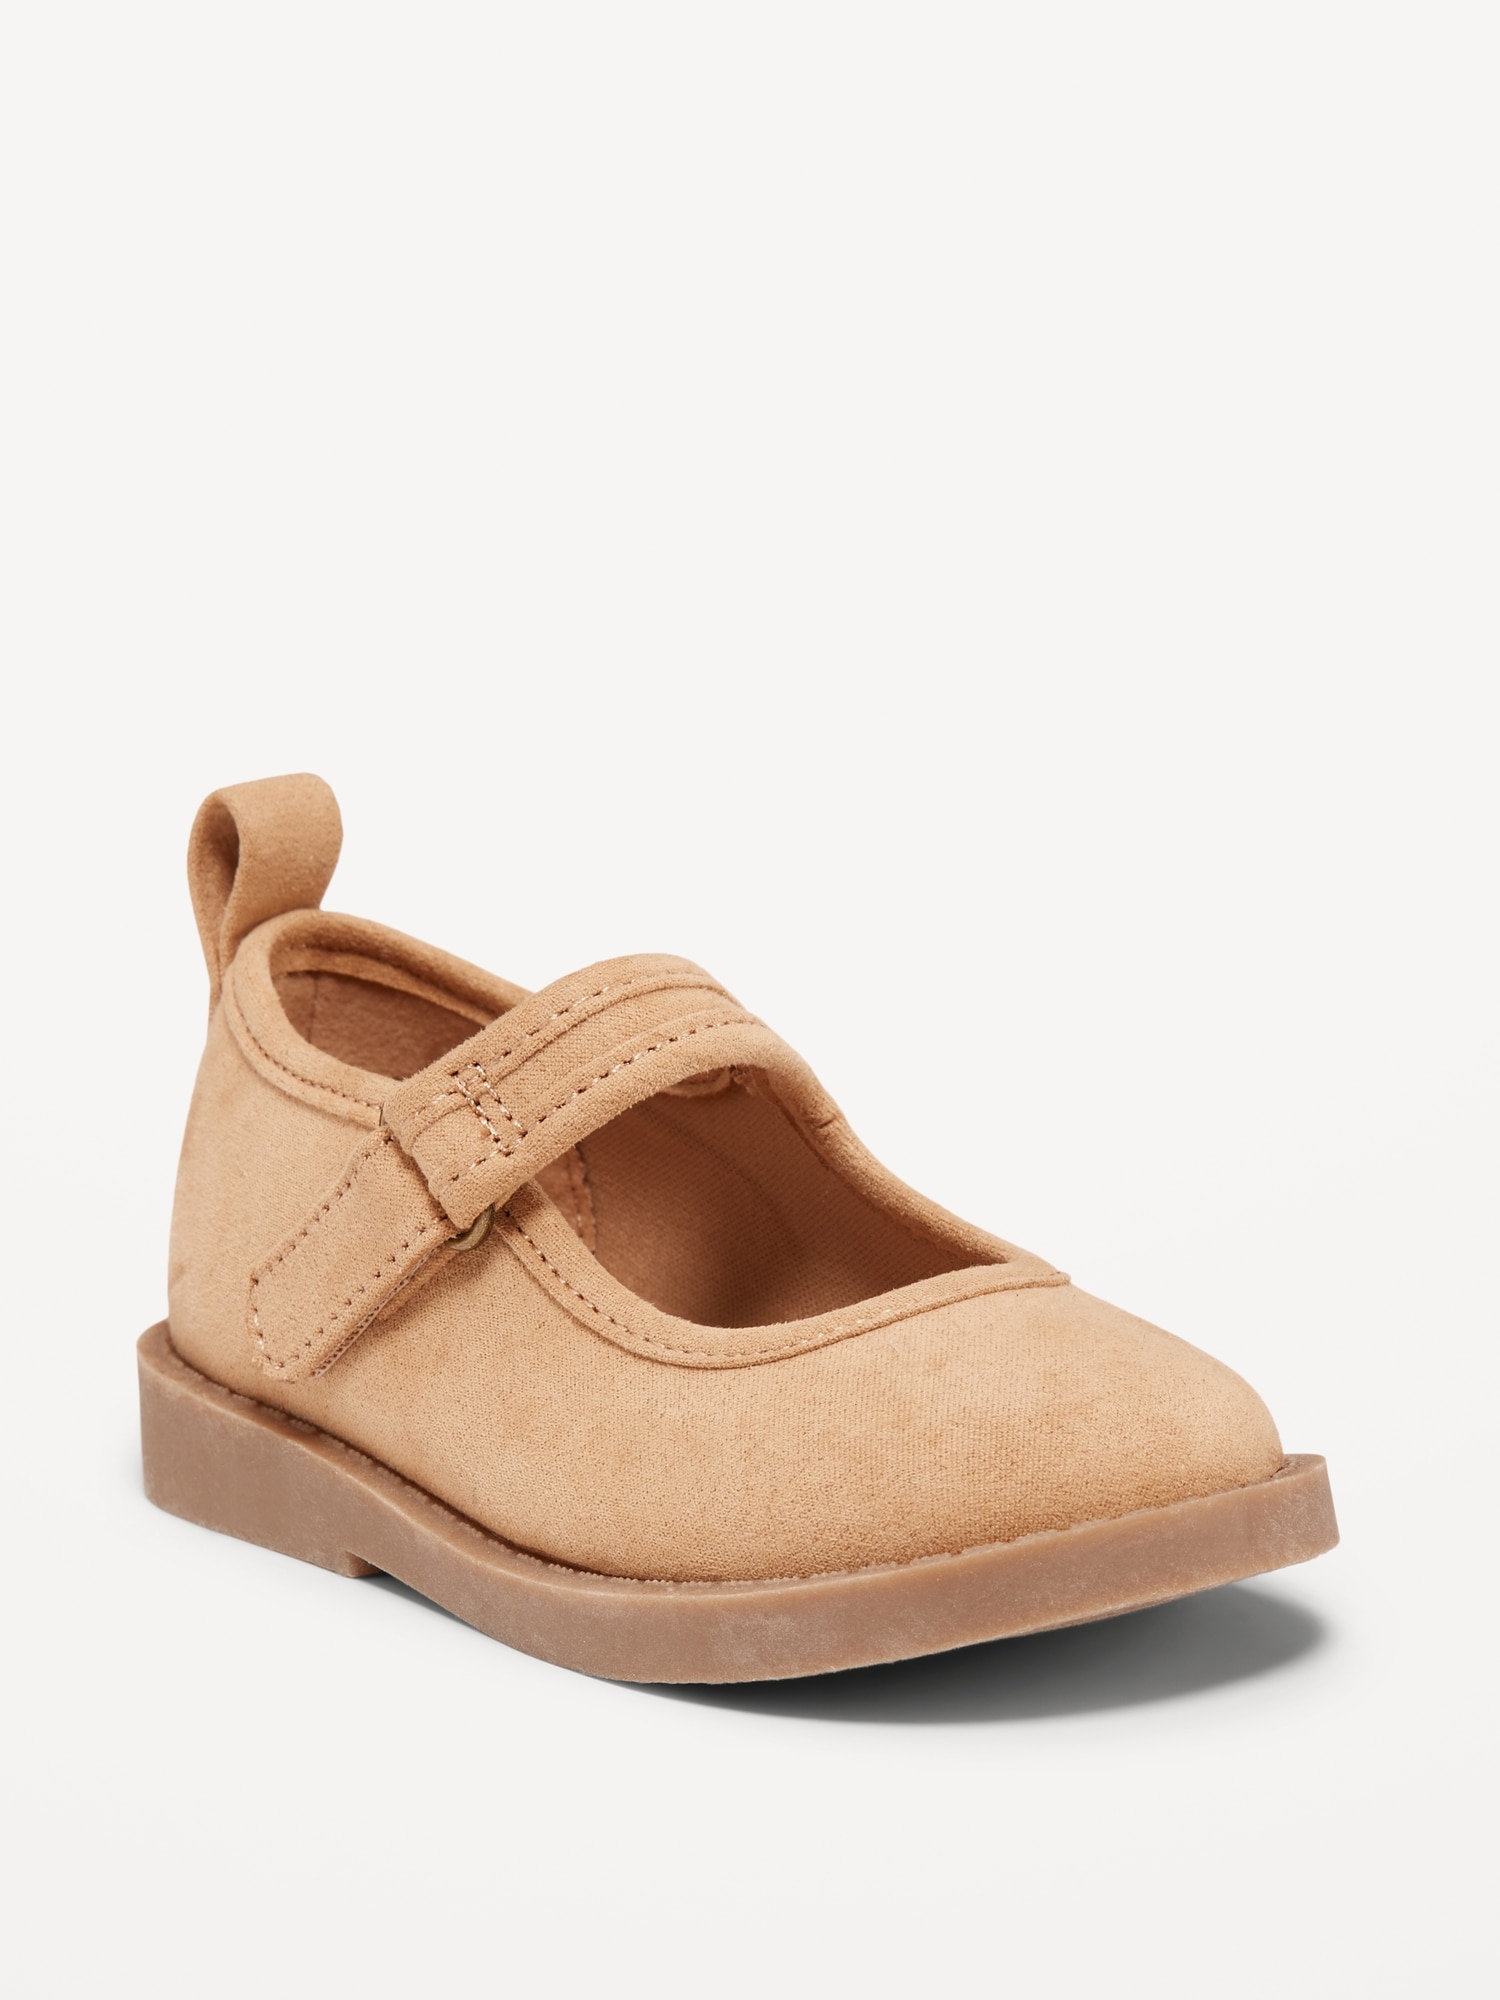 Old Navy Women's Chunky Heel Mary Jane Shoes